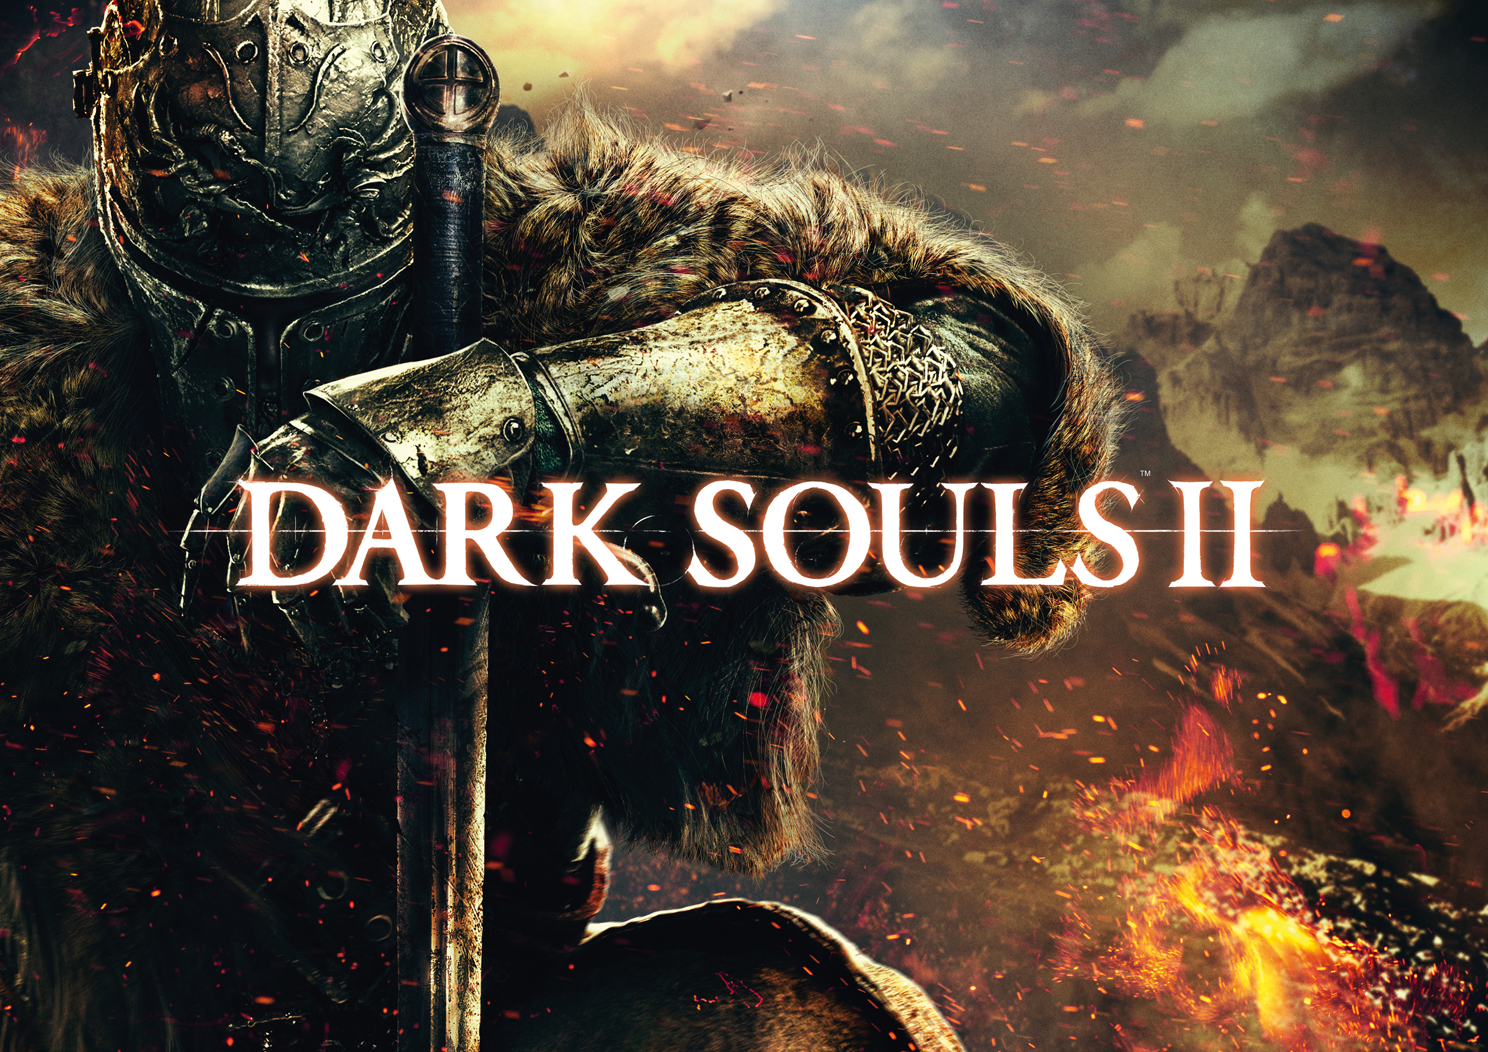 Geek insider, geekinsider, geekinsider. Com,, dark souls ii gets early steam release + 25% discount, gaming